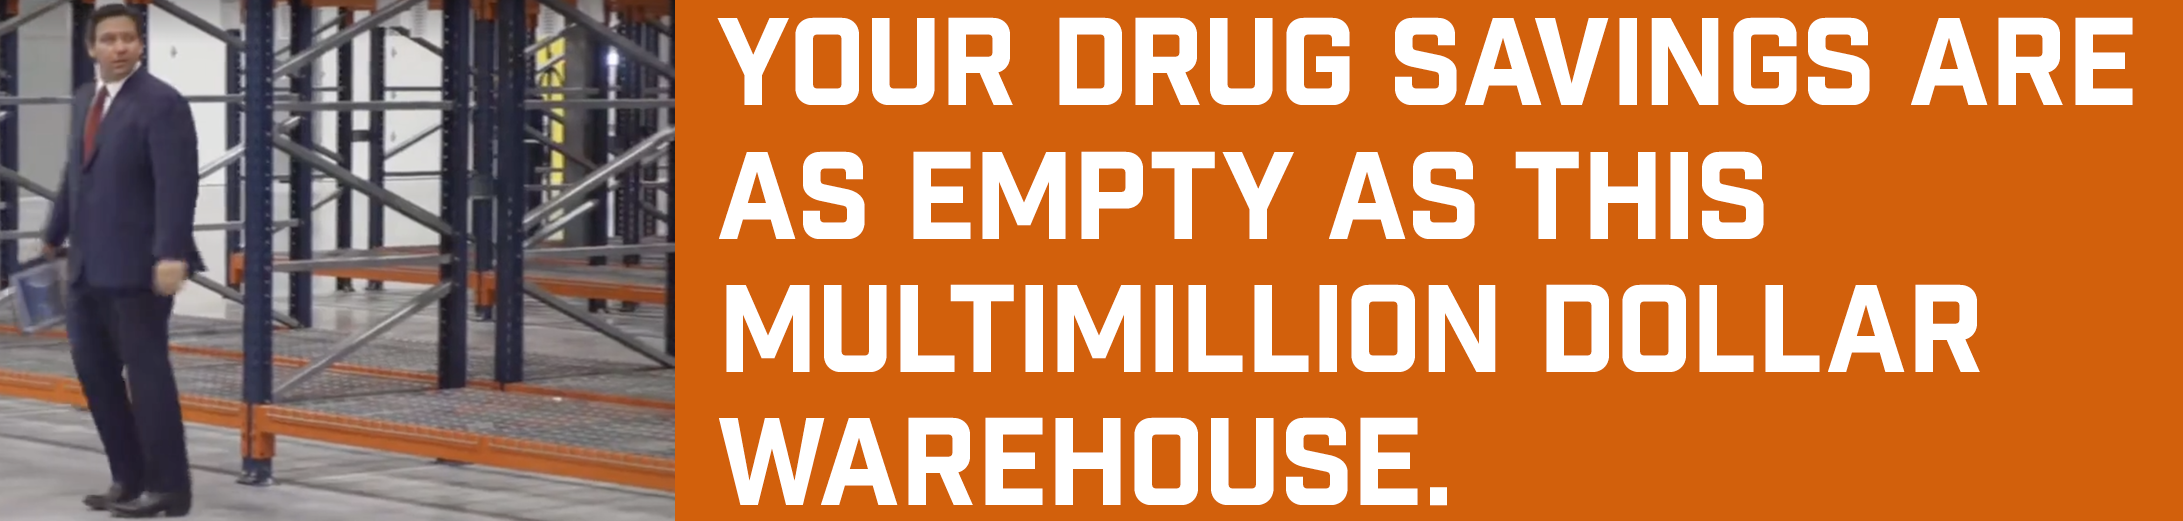 Your drug savings are as empty as this multimillion dollar warehouse.